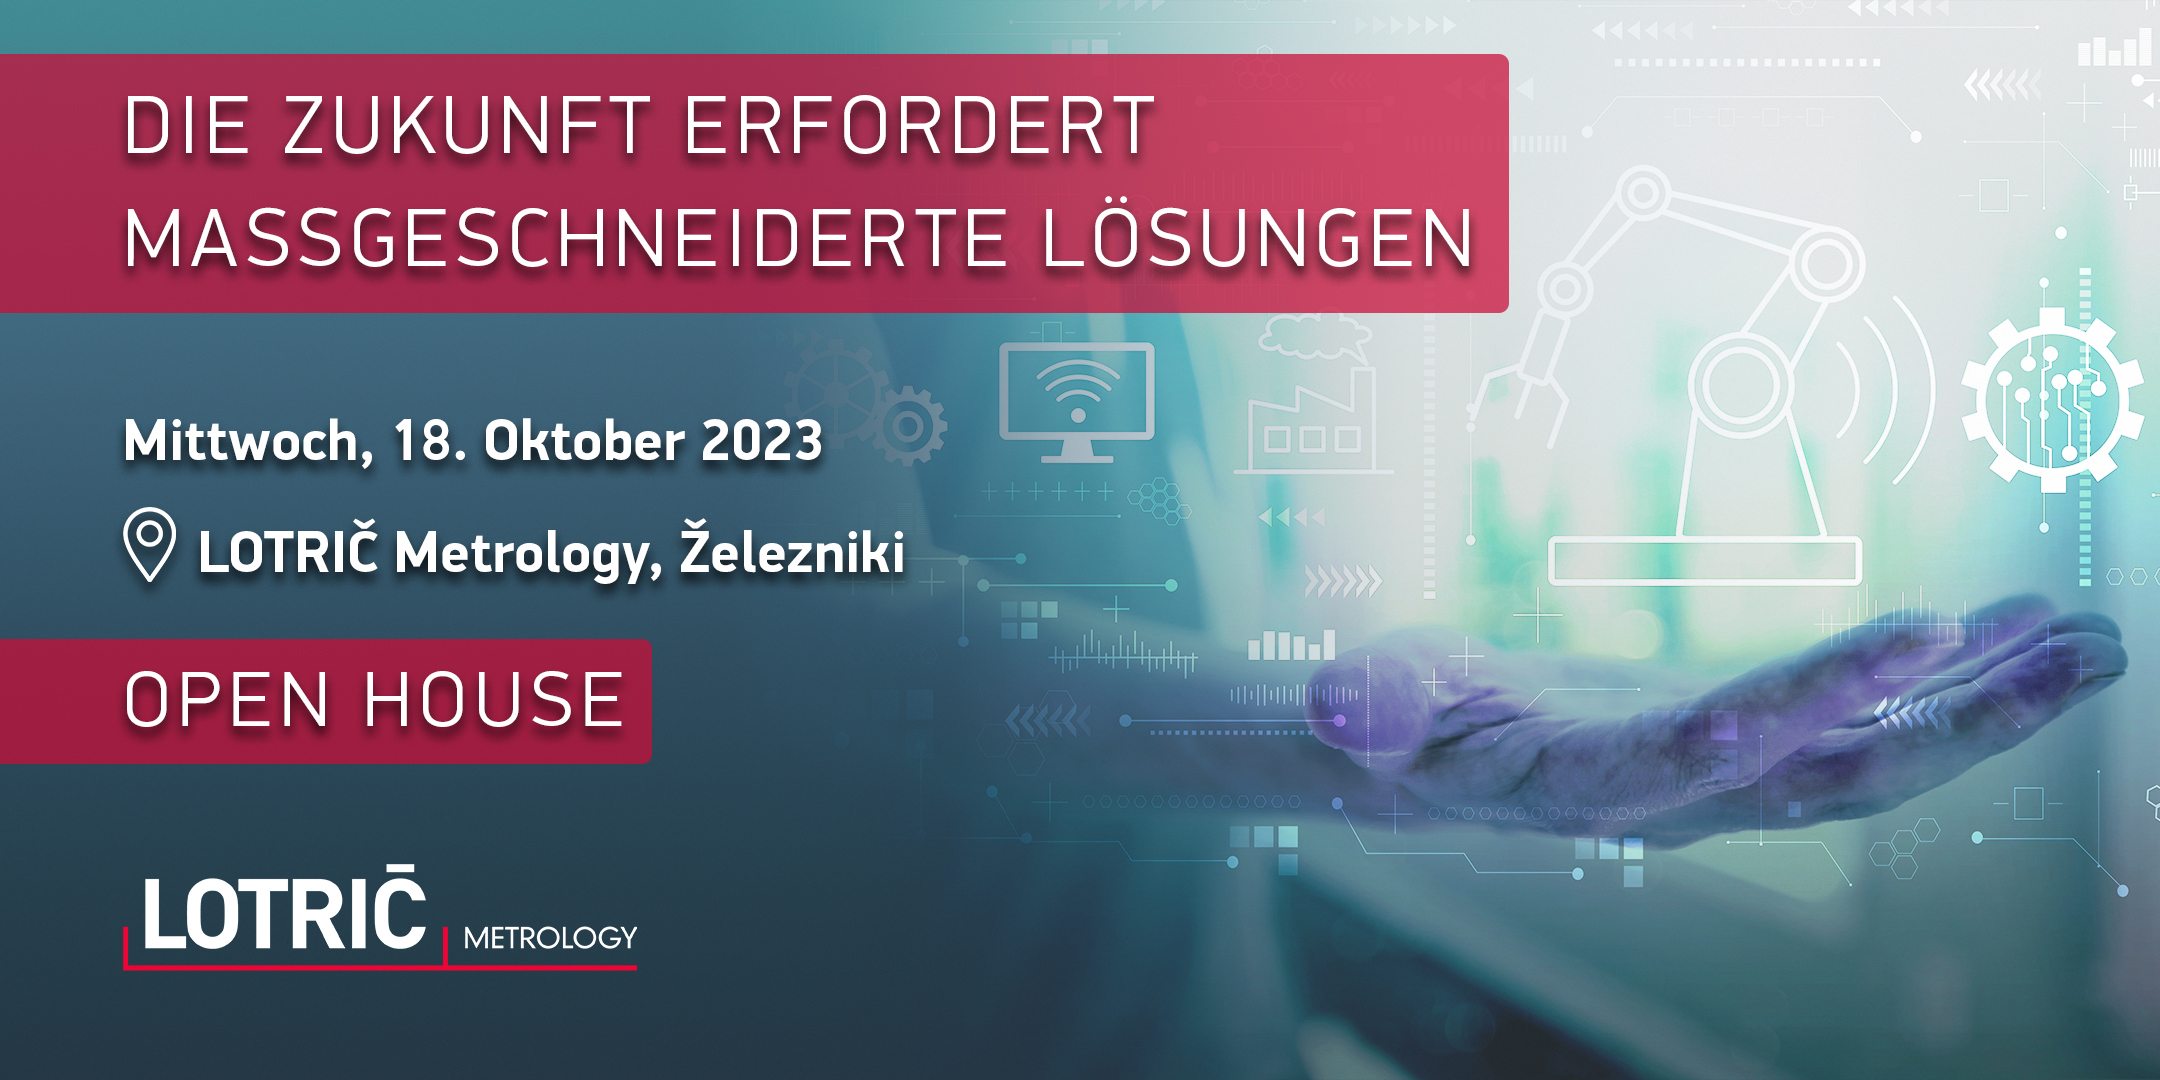 https://www.lotric.si/wp-content/uploads/2023/09/open-house-event-ger.jpg